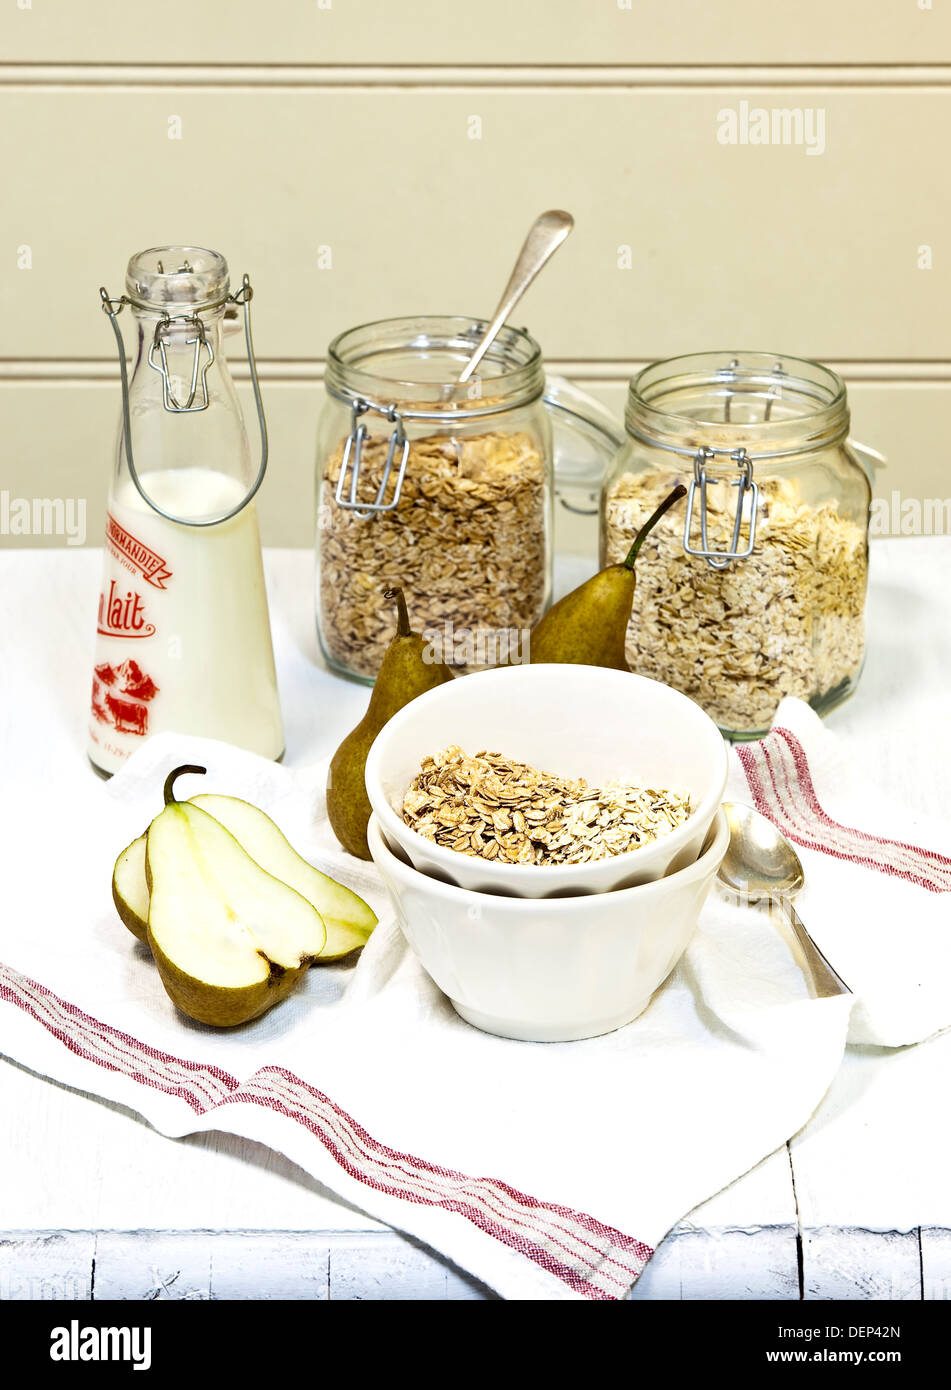 A variety of items making up a low G.I. breakfast of museli, oats, milk and pear. Stock Photo